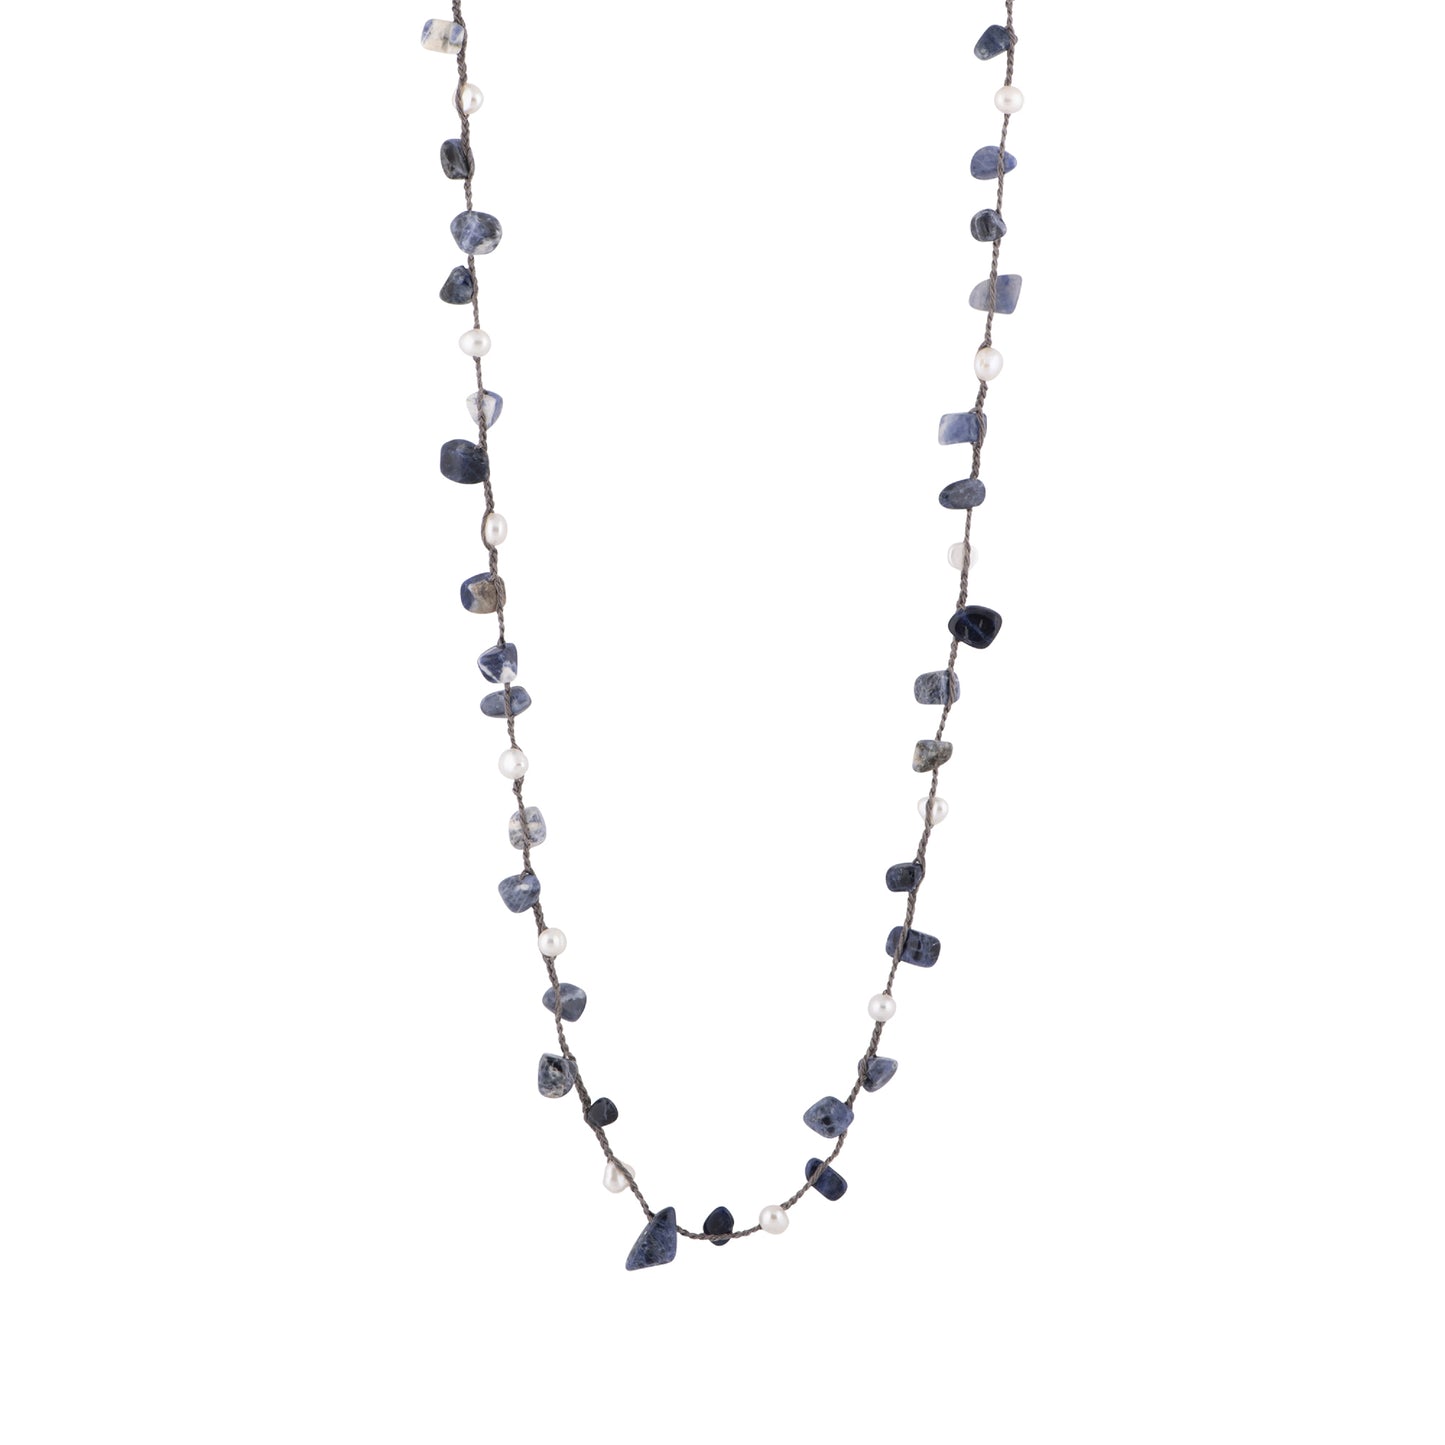 Lexi - Crochet freshwater pearl and stone necklace (Lapis)